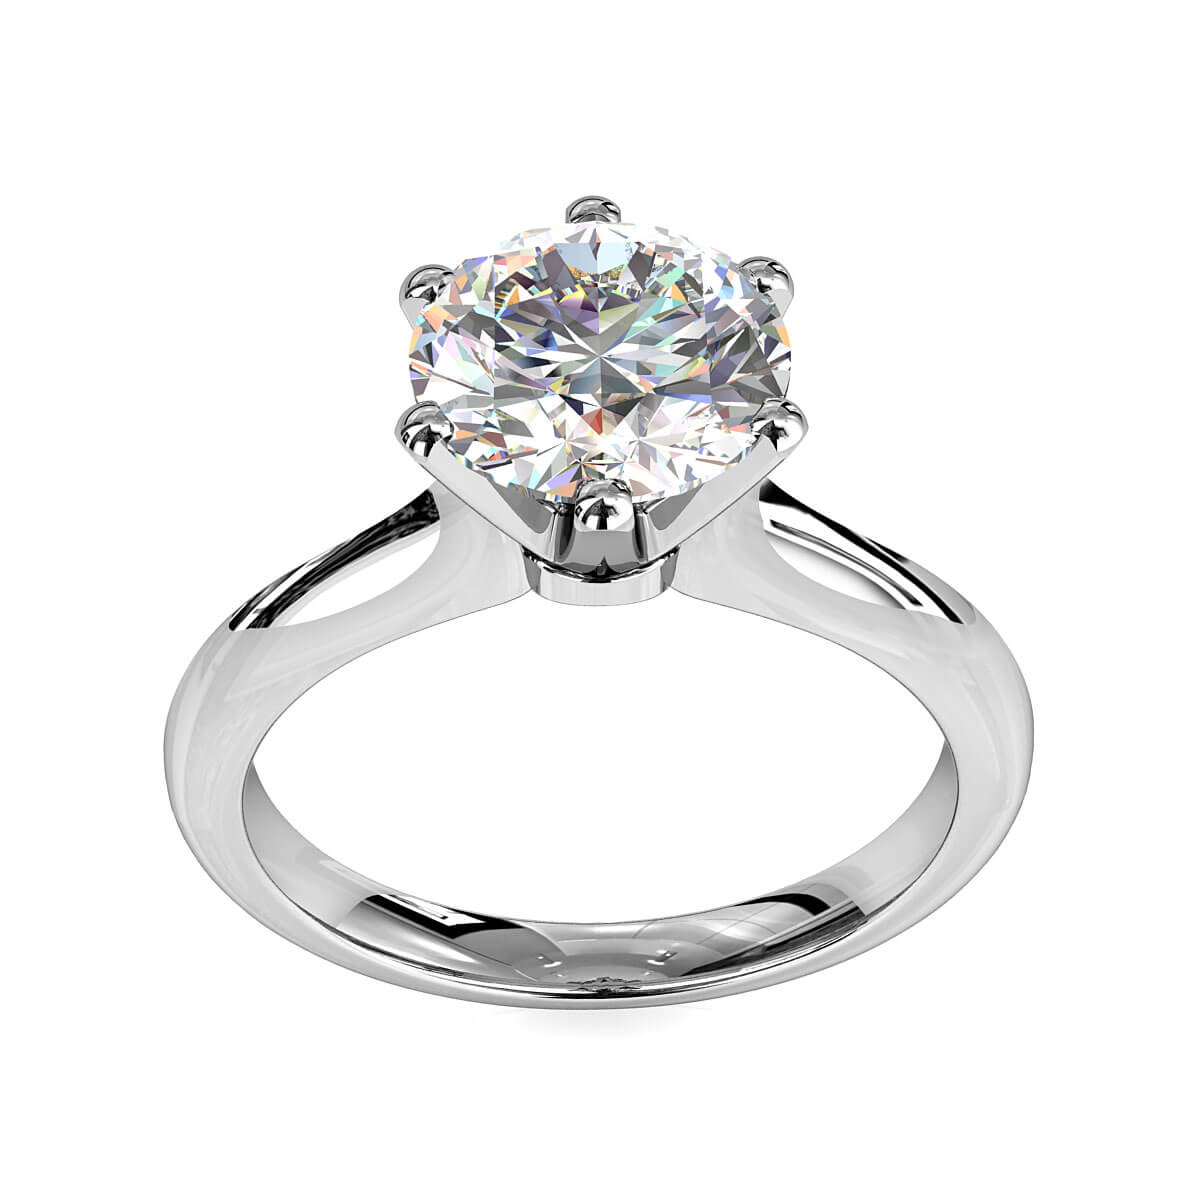 Round Brilliant Cut Solitaire Diamond Engagement Ring, 6 Fine Button Claws Set on Subtle Knife Edge Tapered Rounded Band with Crown Undersetting.